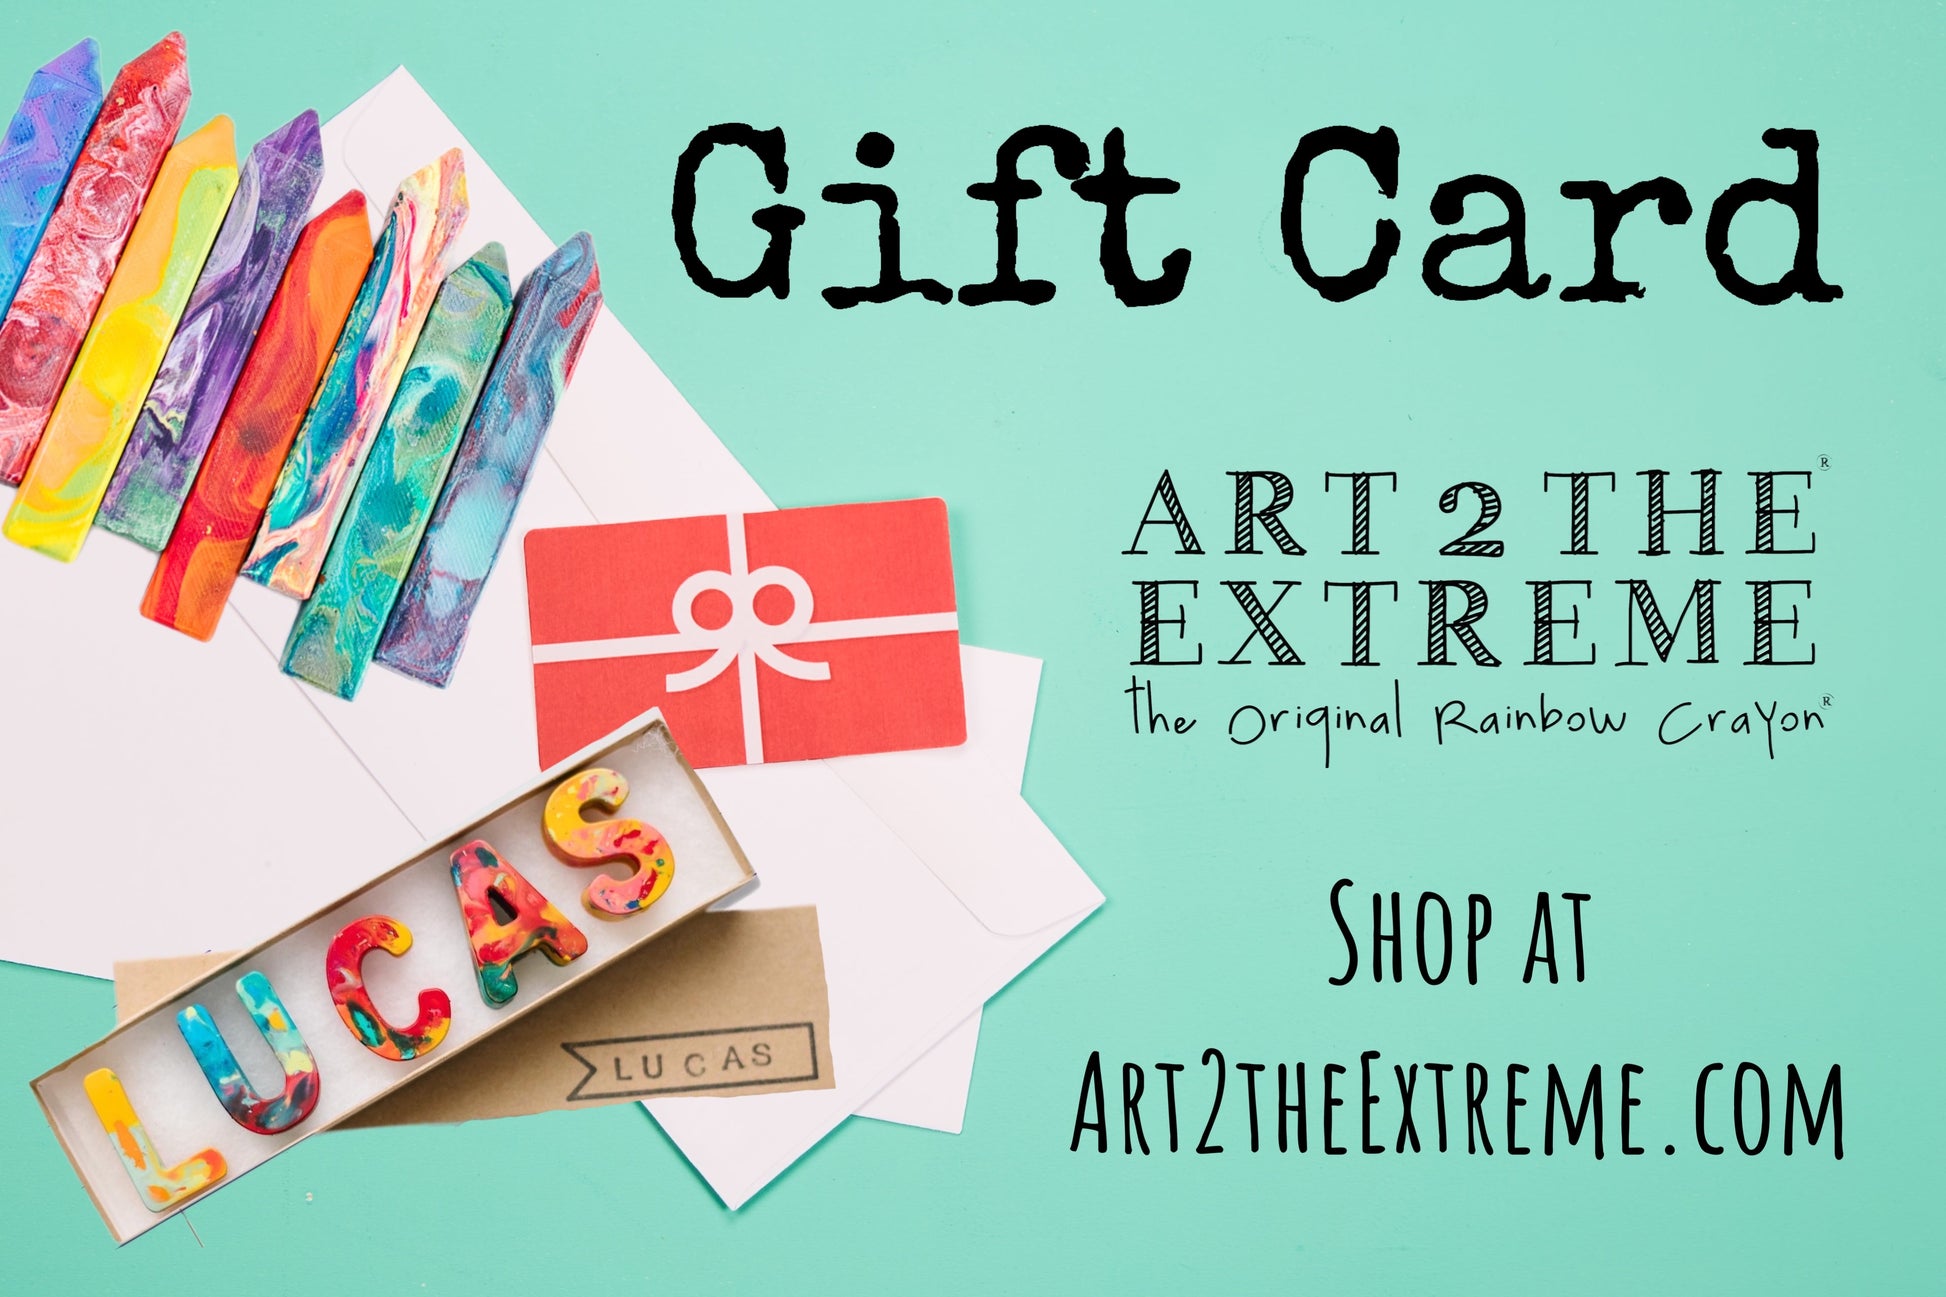 Rainbow Crayon gift card to Art 2 the Extreme crayon shop, home of the original Rainbow Crayon. Custom Crayon digital gift card. 